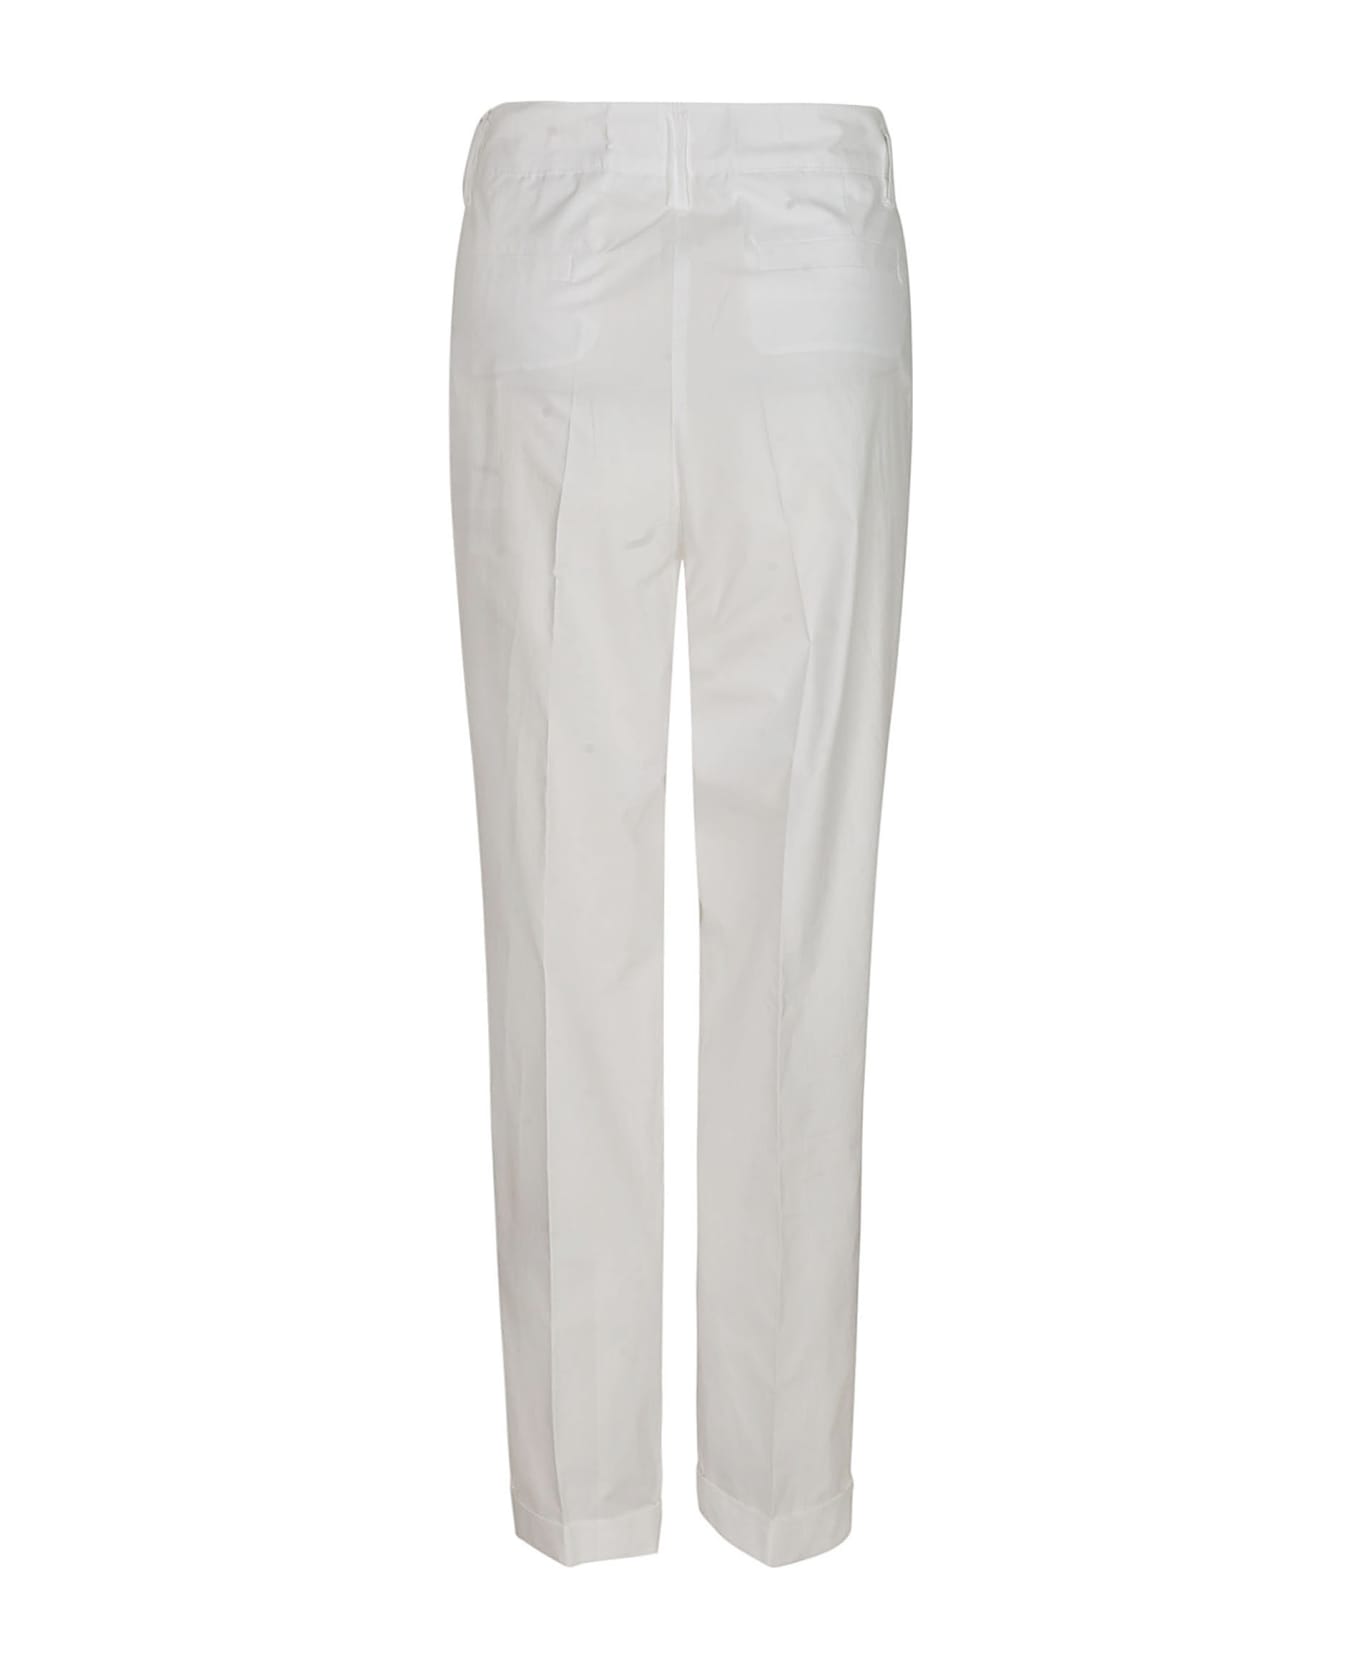 Parosh Slim Fit Buttoned Trousers - White